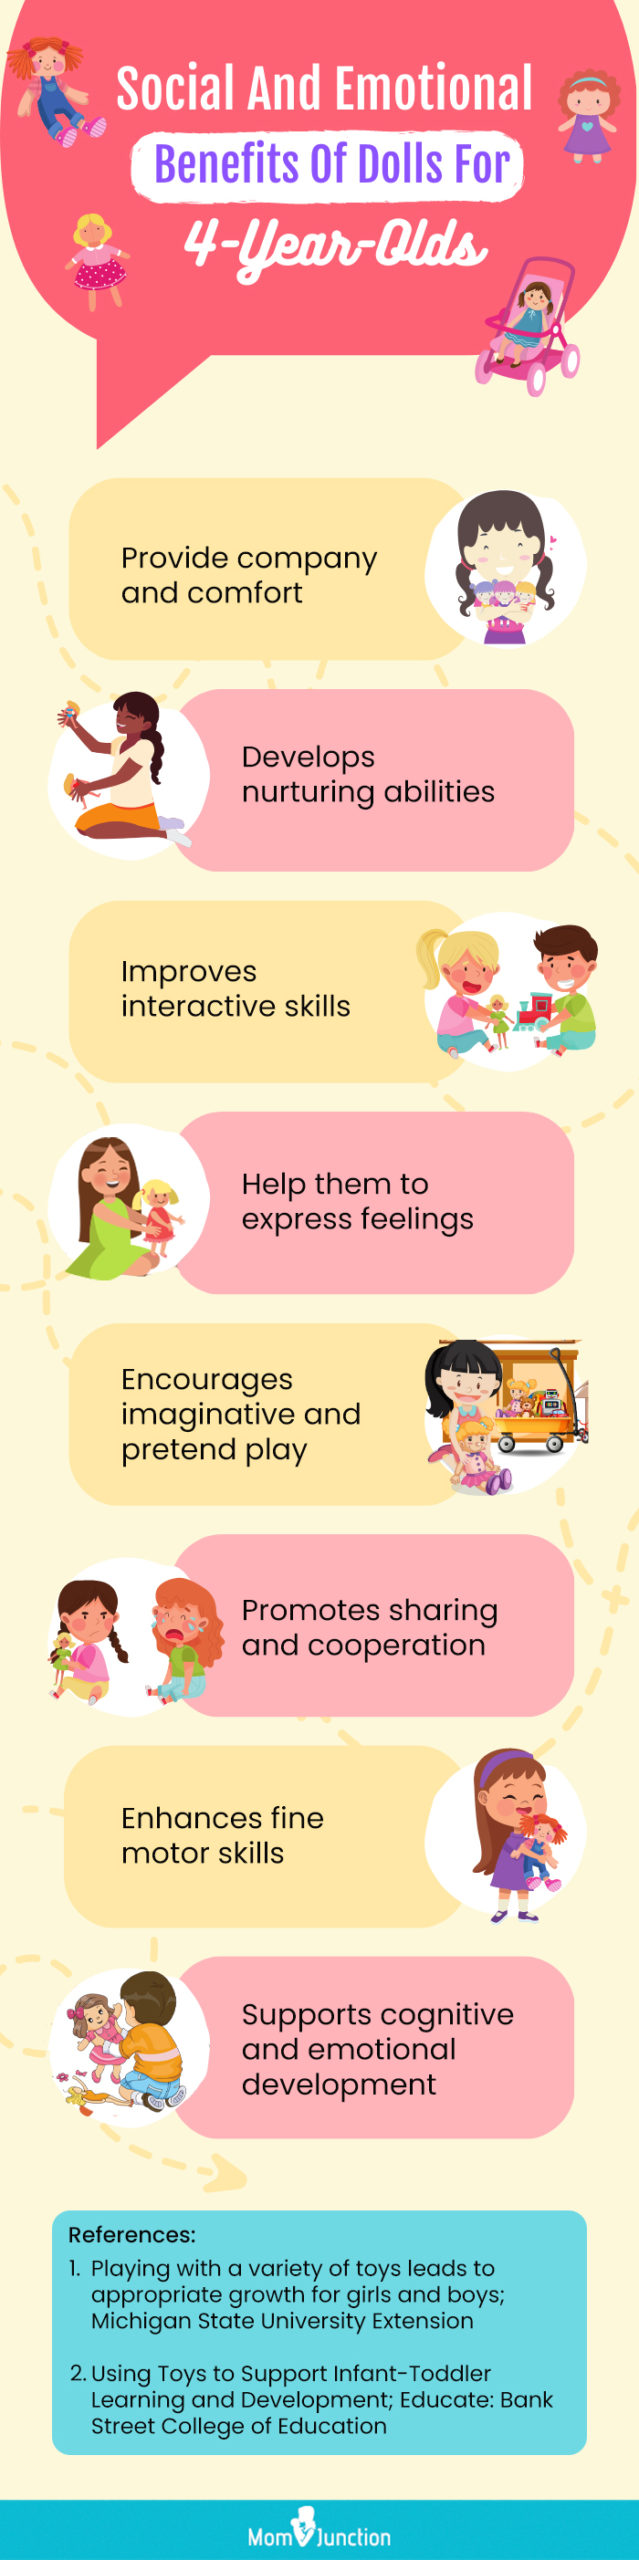 Social And Emotional Benefits Of Dolls For 4-Year-Olds